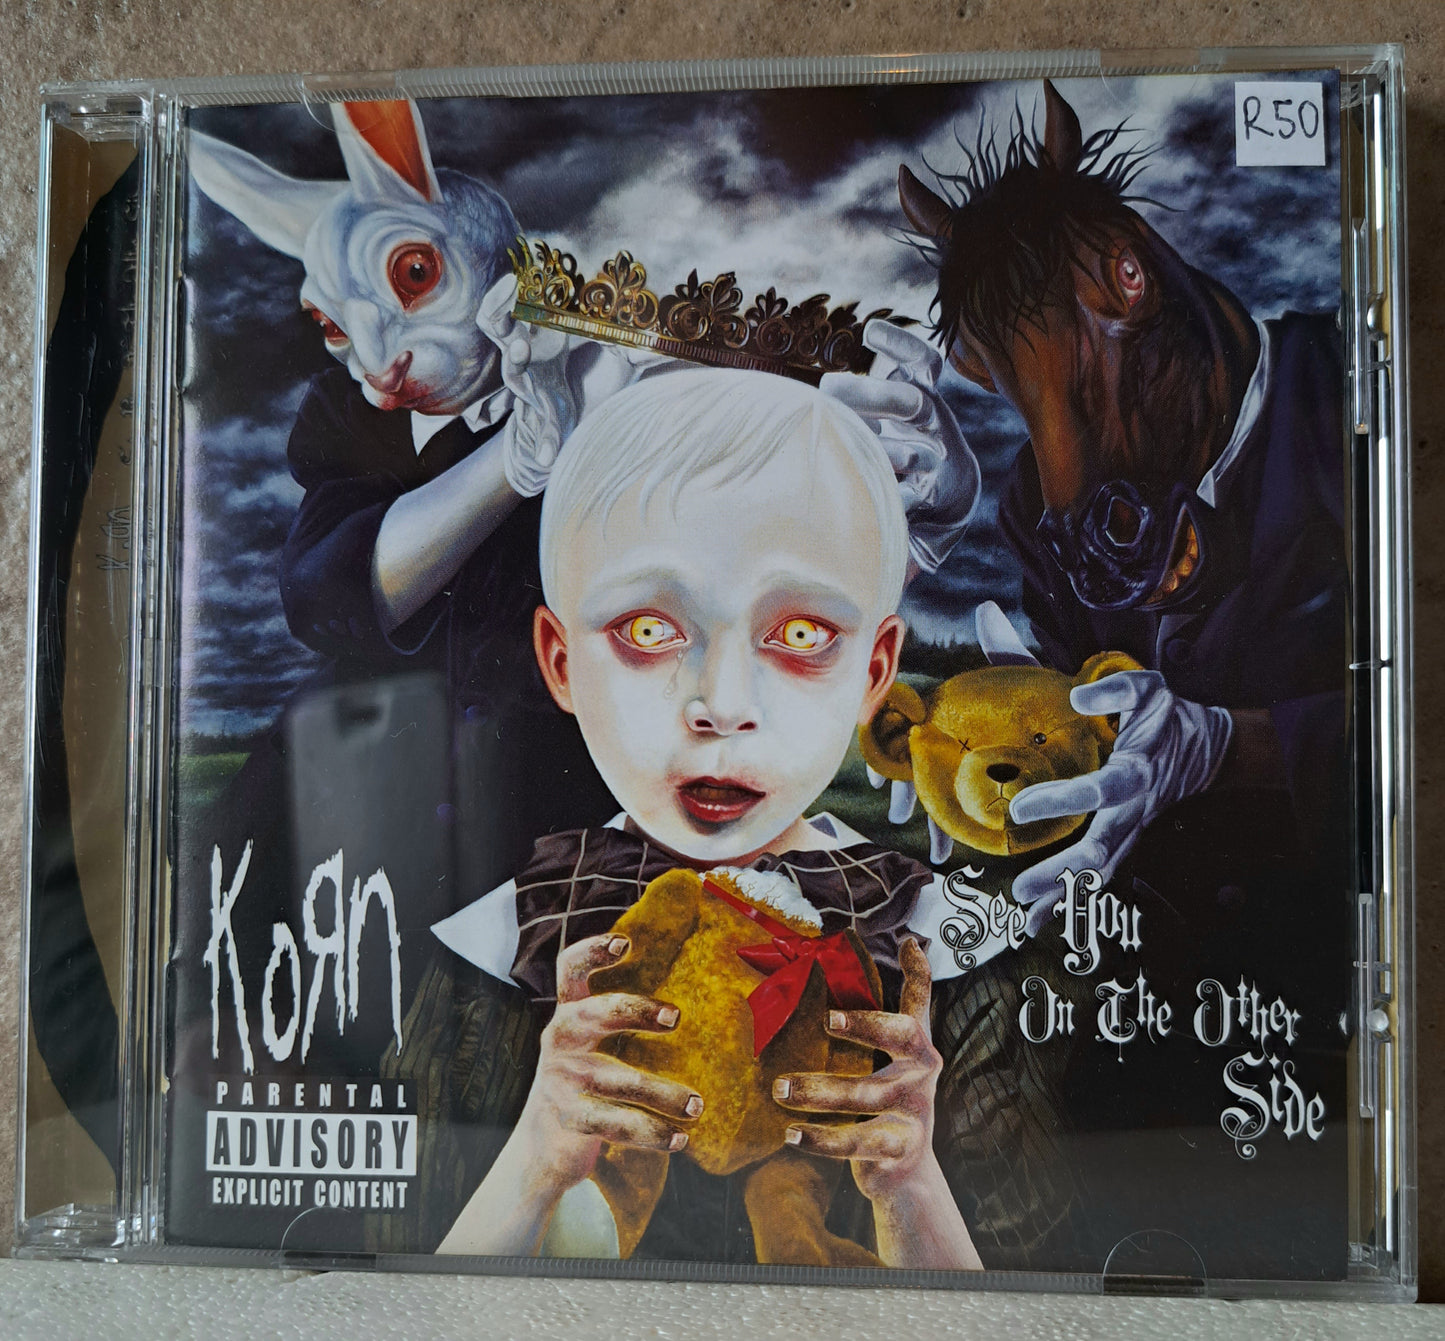 Korn - See you on the other side (cd)